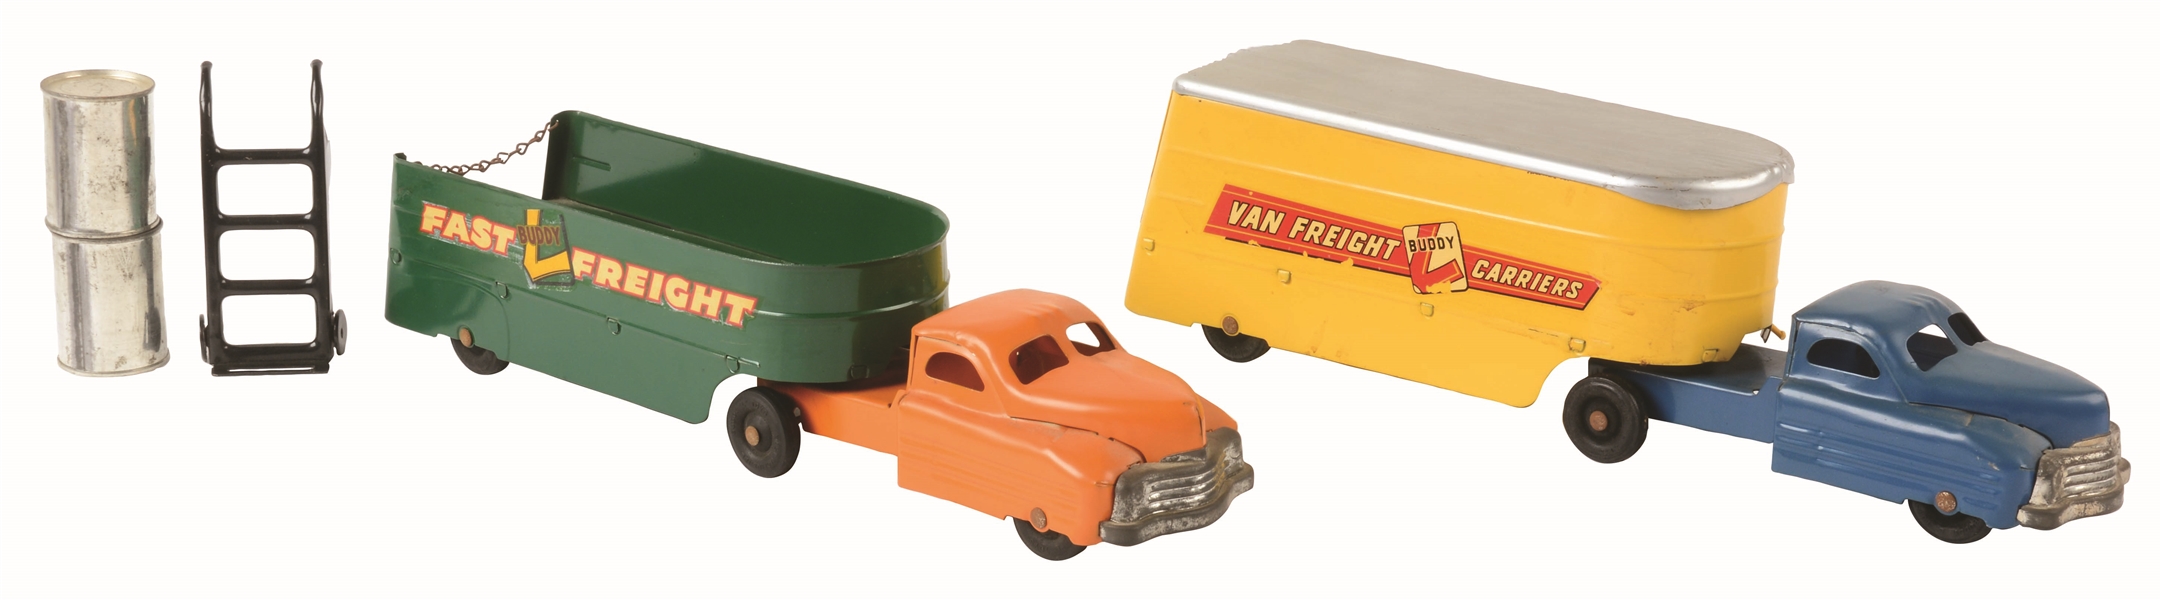 LOT OF 2: BUDDY L PRESSED STEEL TRAILER VEHICLE TOYS.